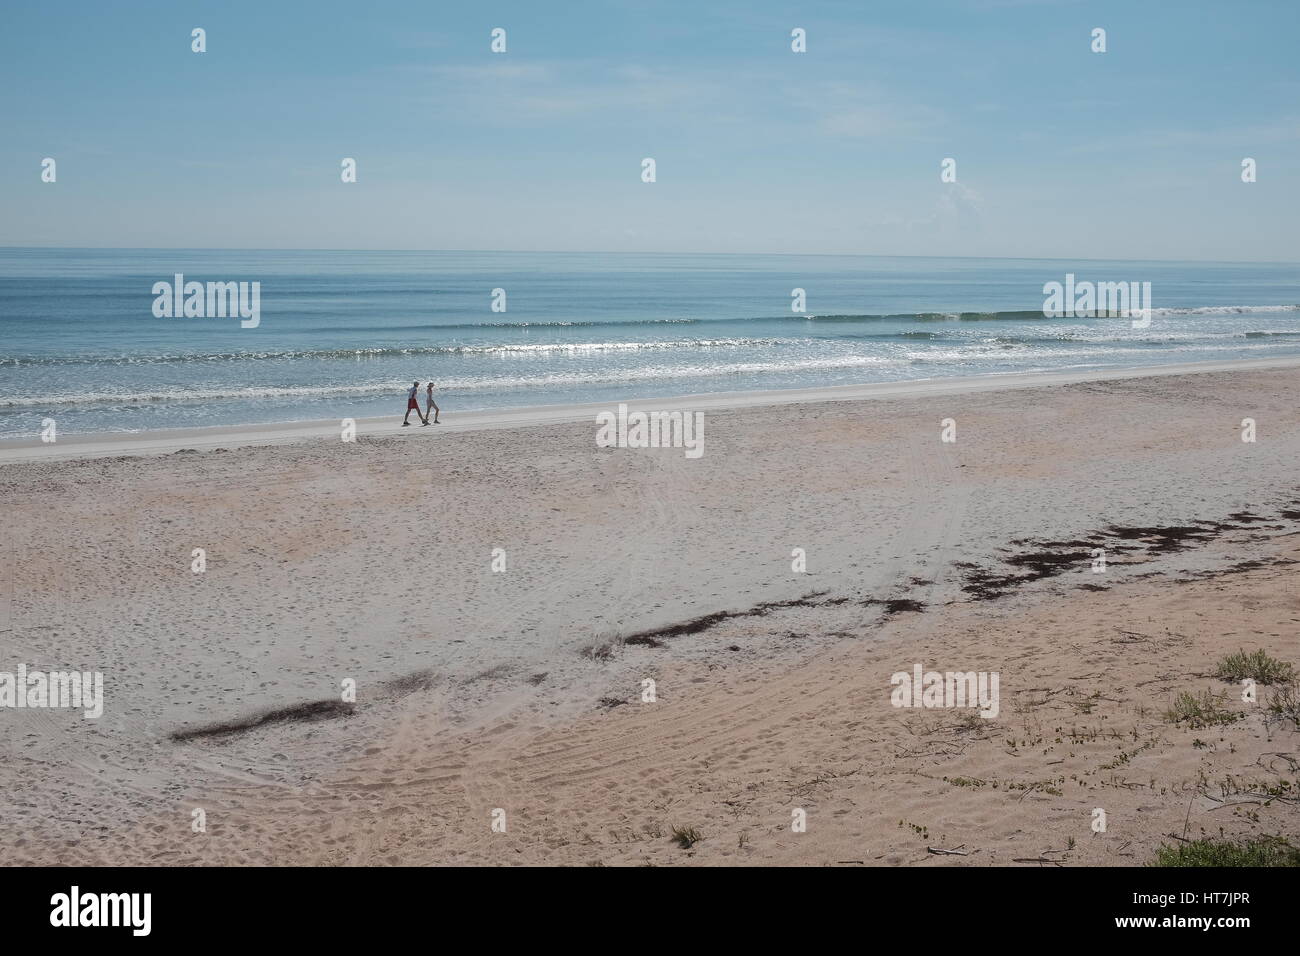 Far from crowds, a man and a woman take a stroll along beautiful Bethune Beach on a sunny day and under a blue sky while ocean waves gently roll in. Stock Photo